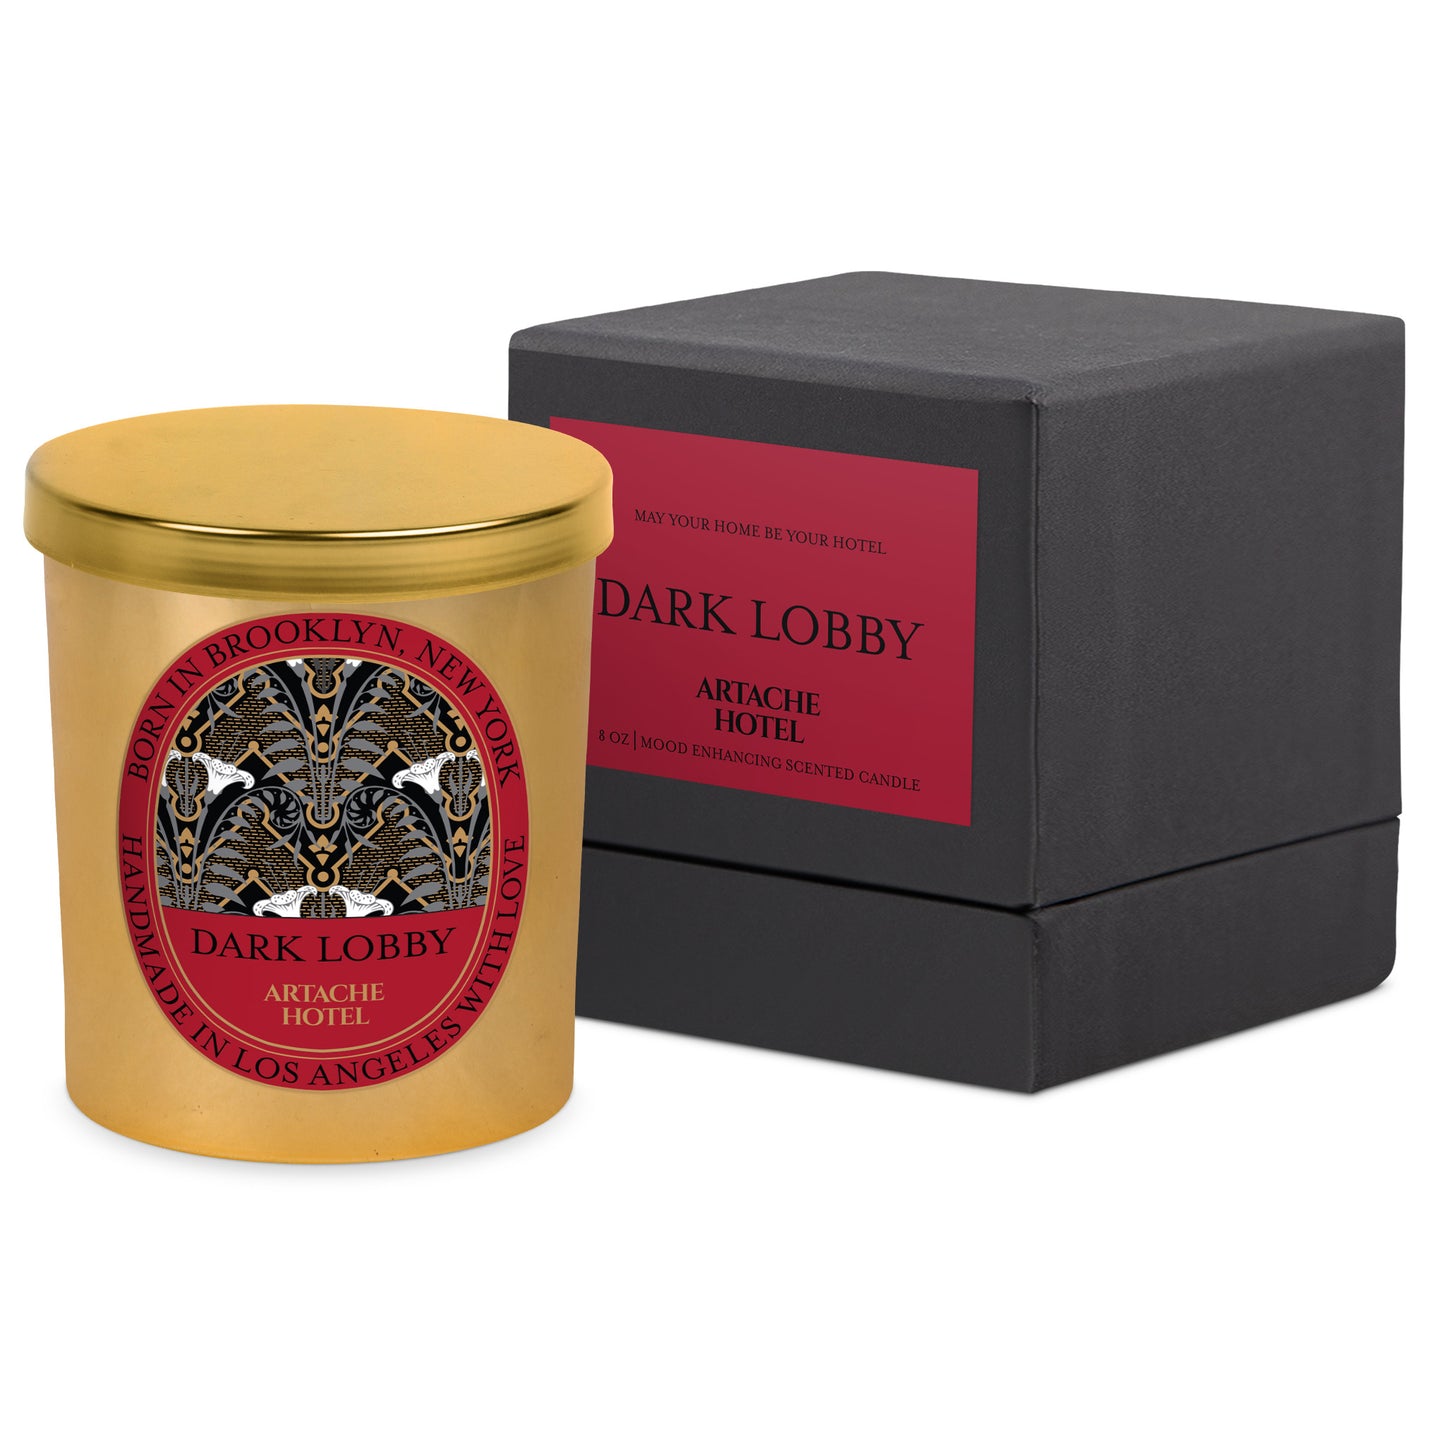 DARK LOBBY Scented Candle - 8 oz